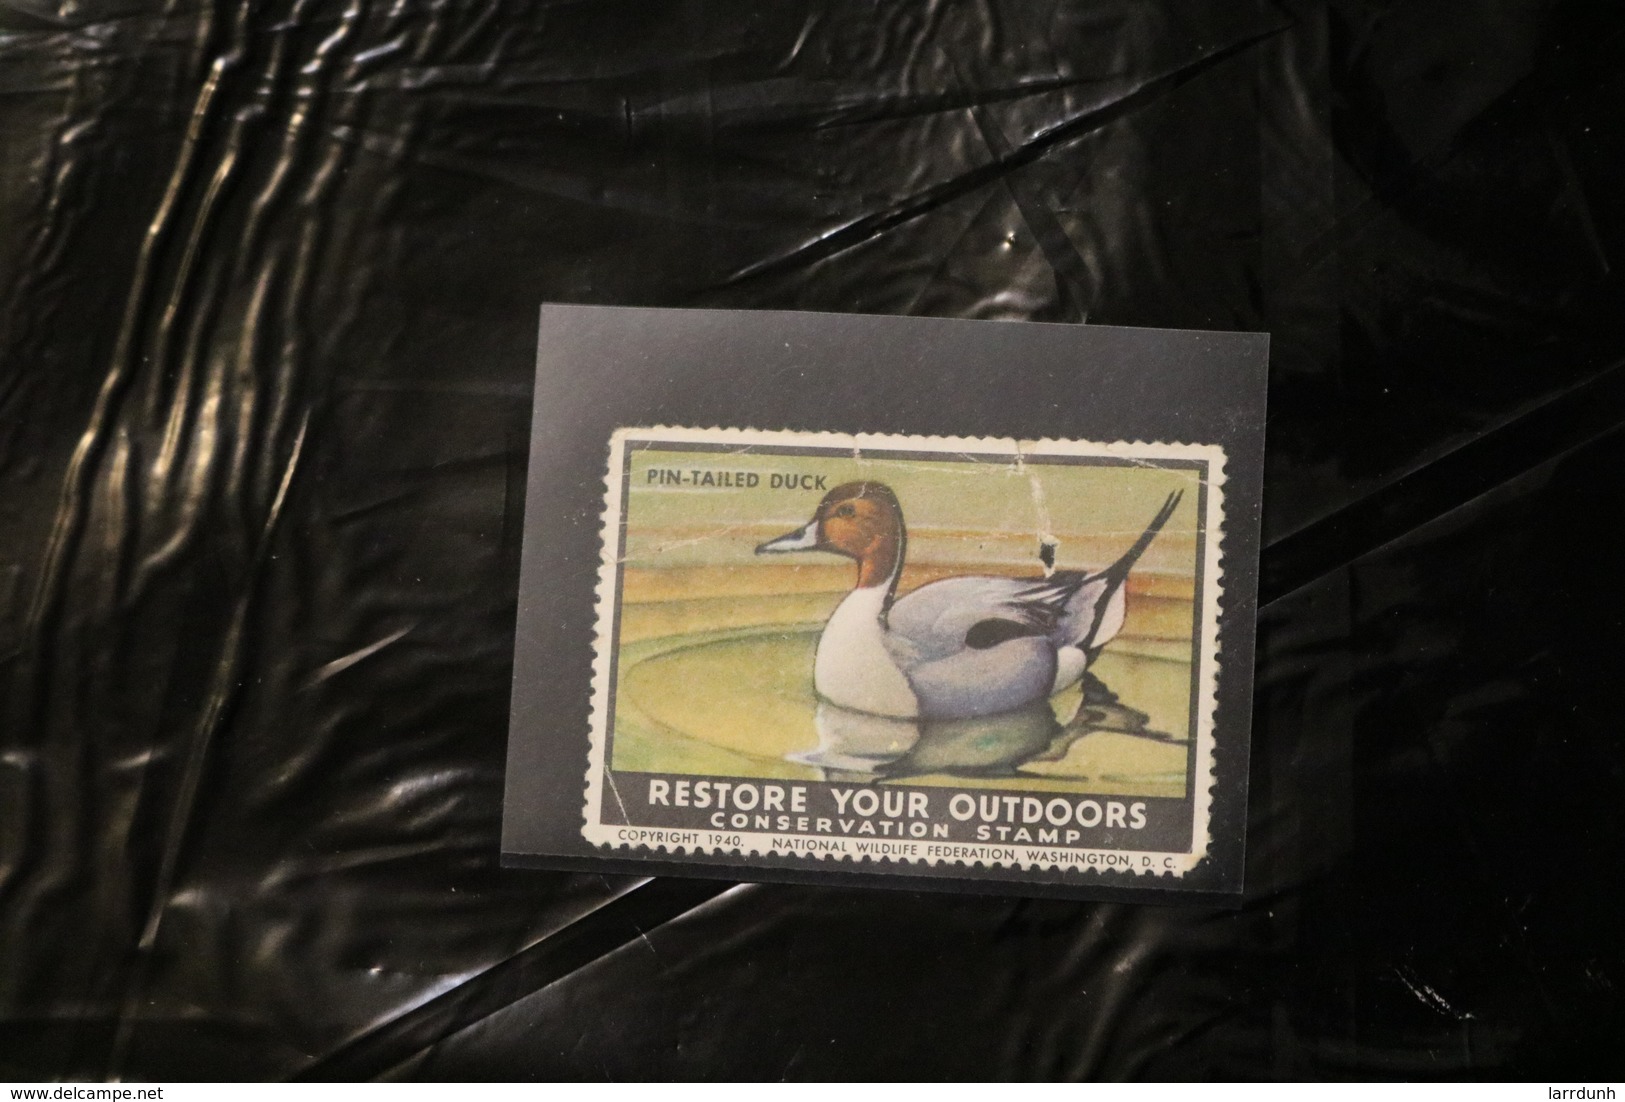 United States 1940 NWF National Wildlife Federation Stamp Unused Tear WYSIWYG Pin-Tailed Duck A04s - Duck Stamps